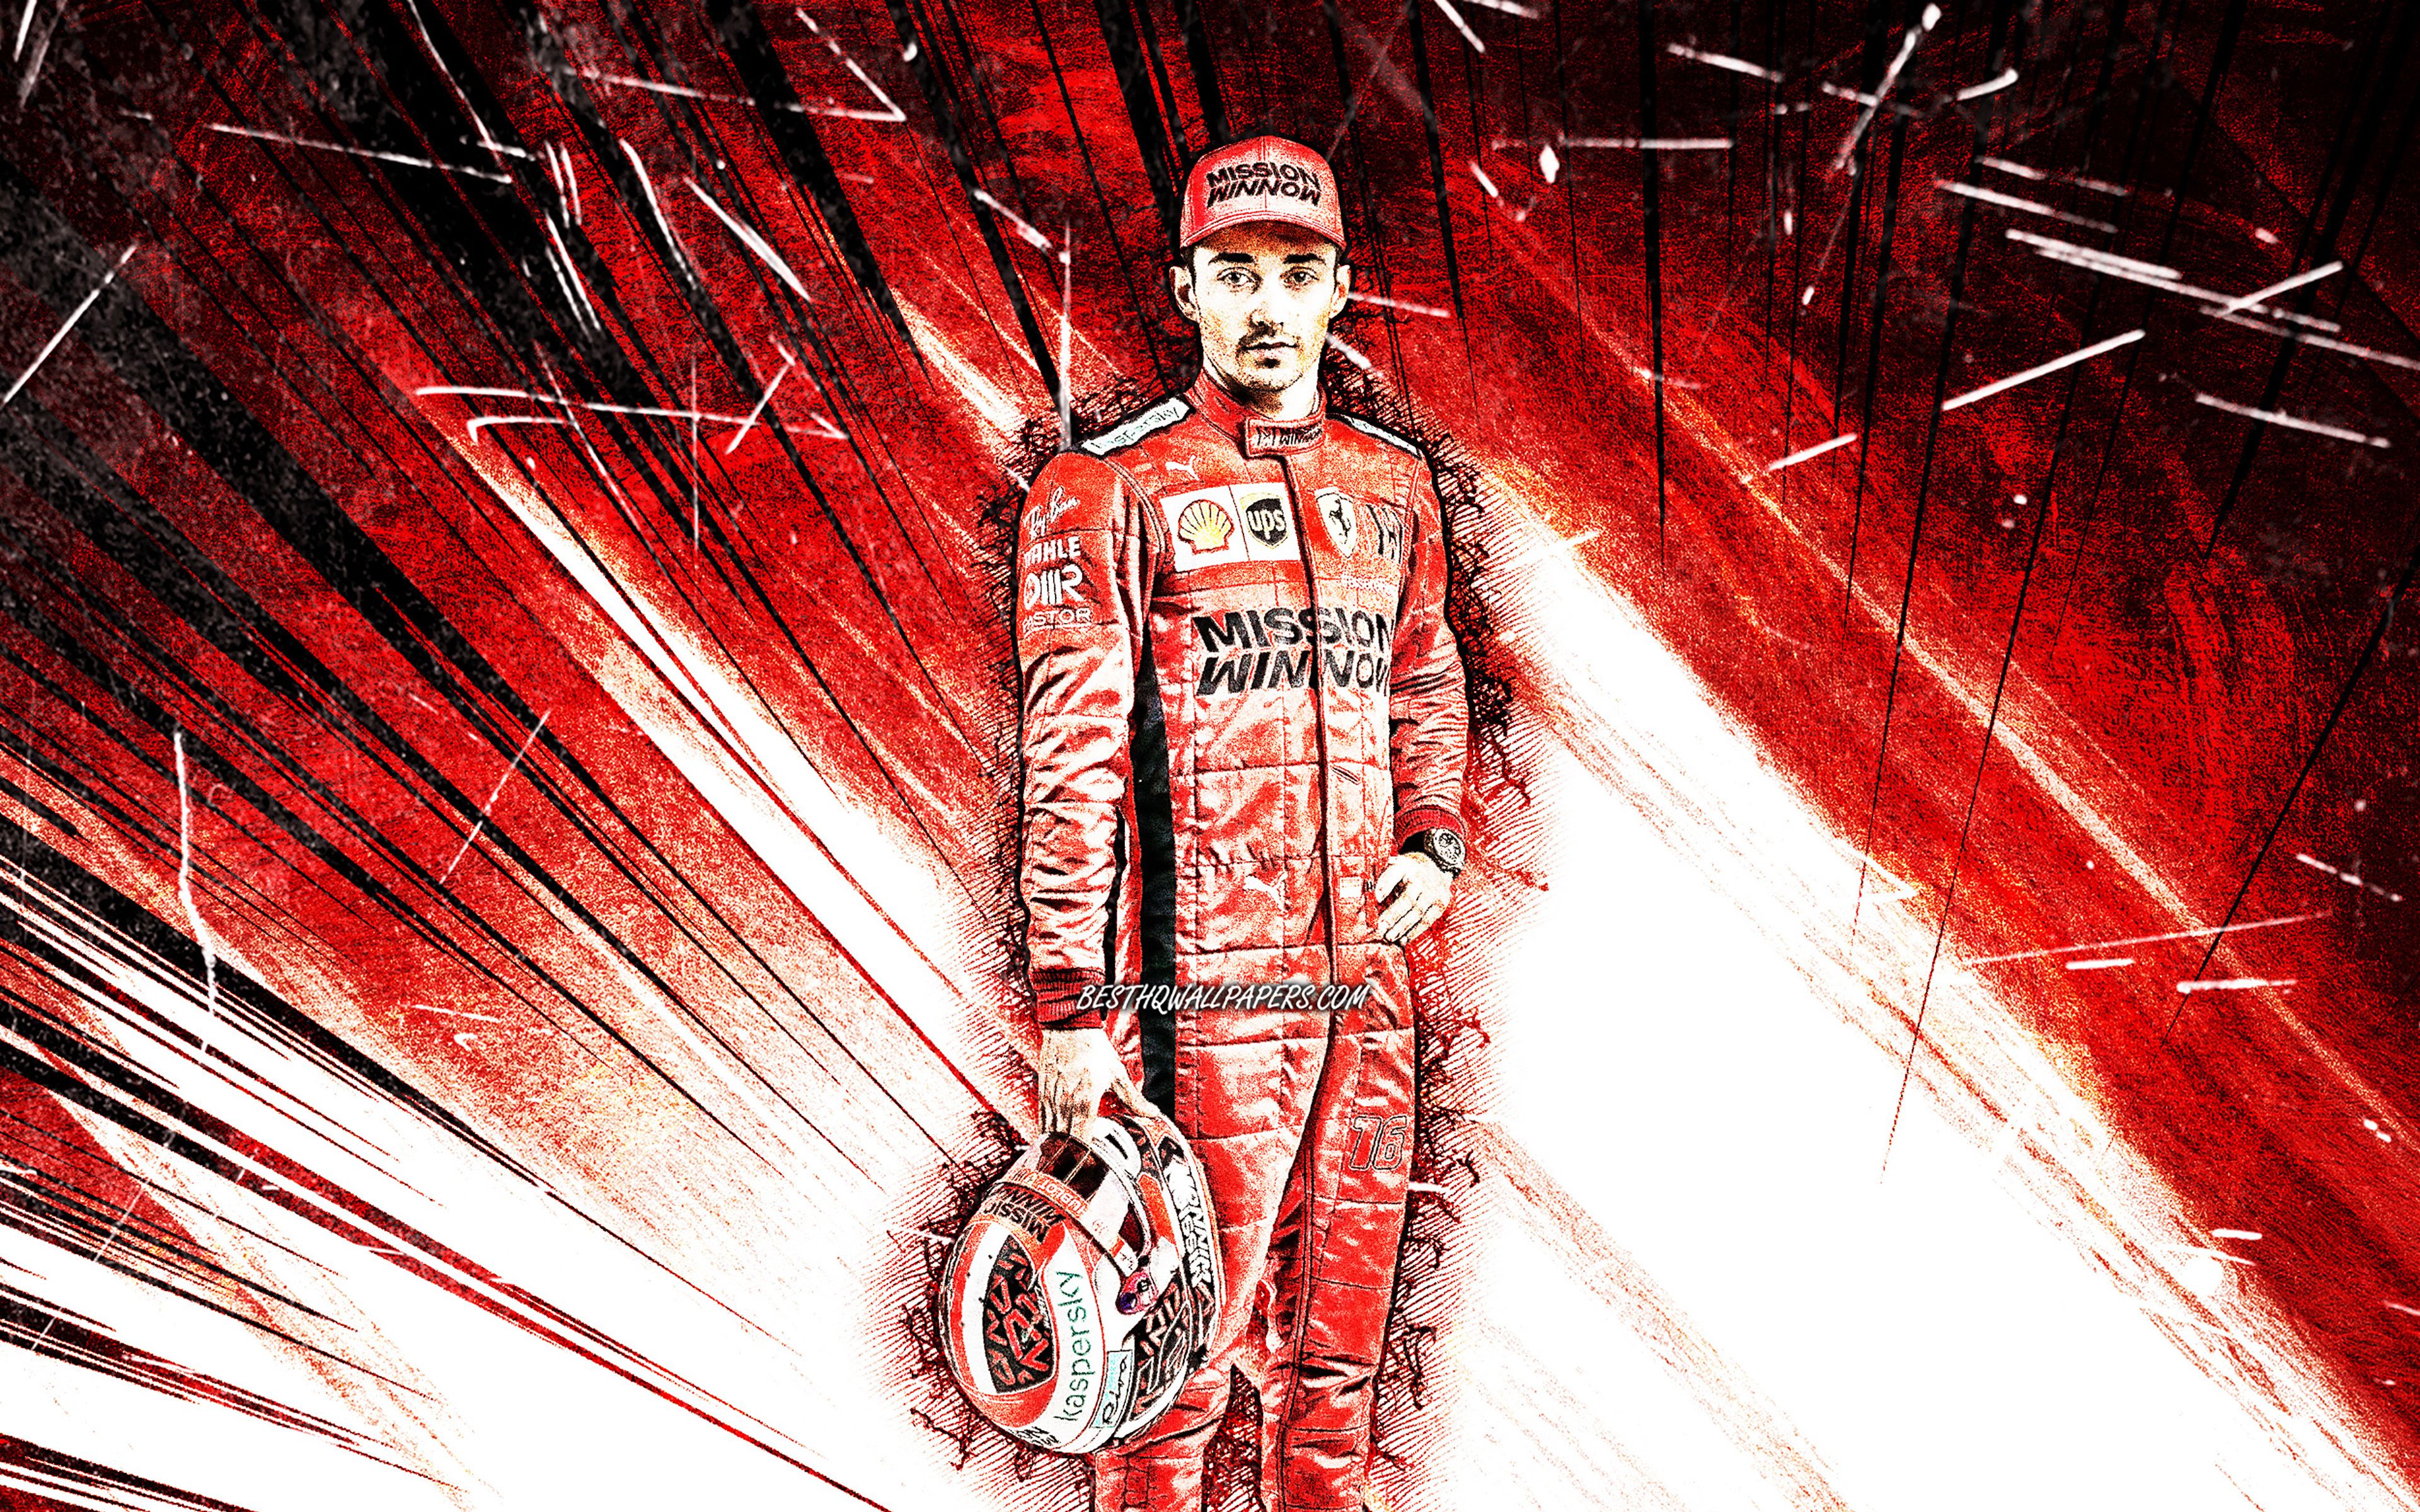 Download wallpaper 4k, Charles Leclerc, grunge art, Scuderia Ferrari Mission Winnow, monegasque racing drivers, Formula red abstract rays, F1 2021 for desktop with resolution 3840x2400. High Quality HD picture wallpaper